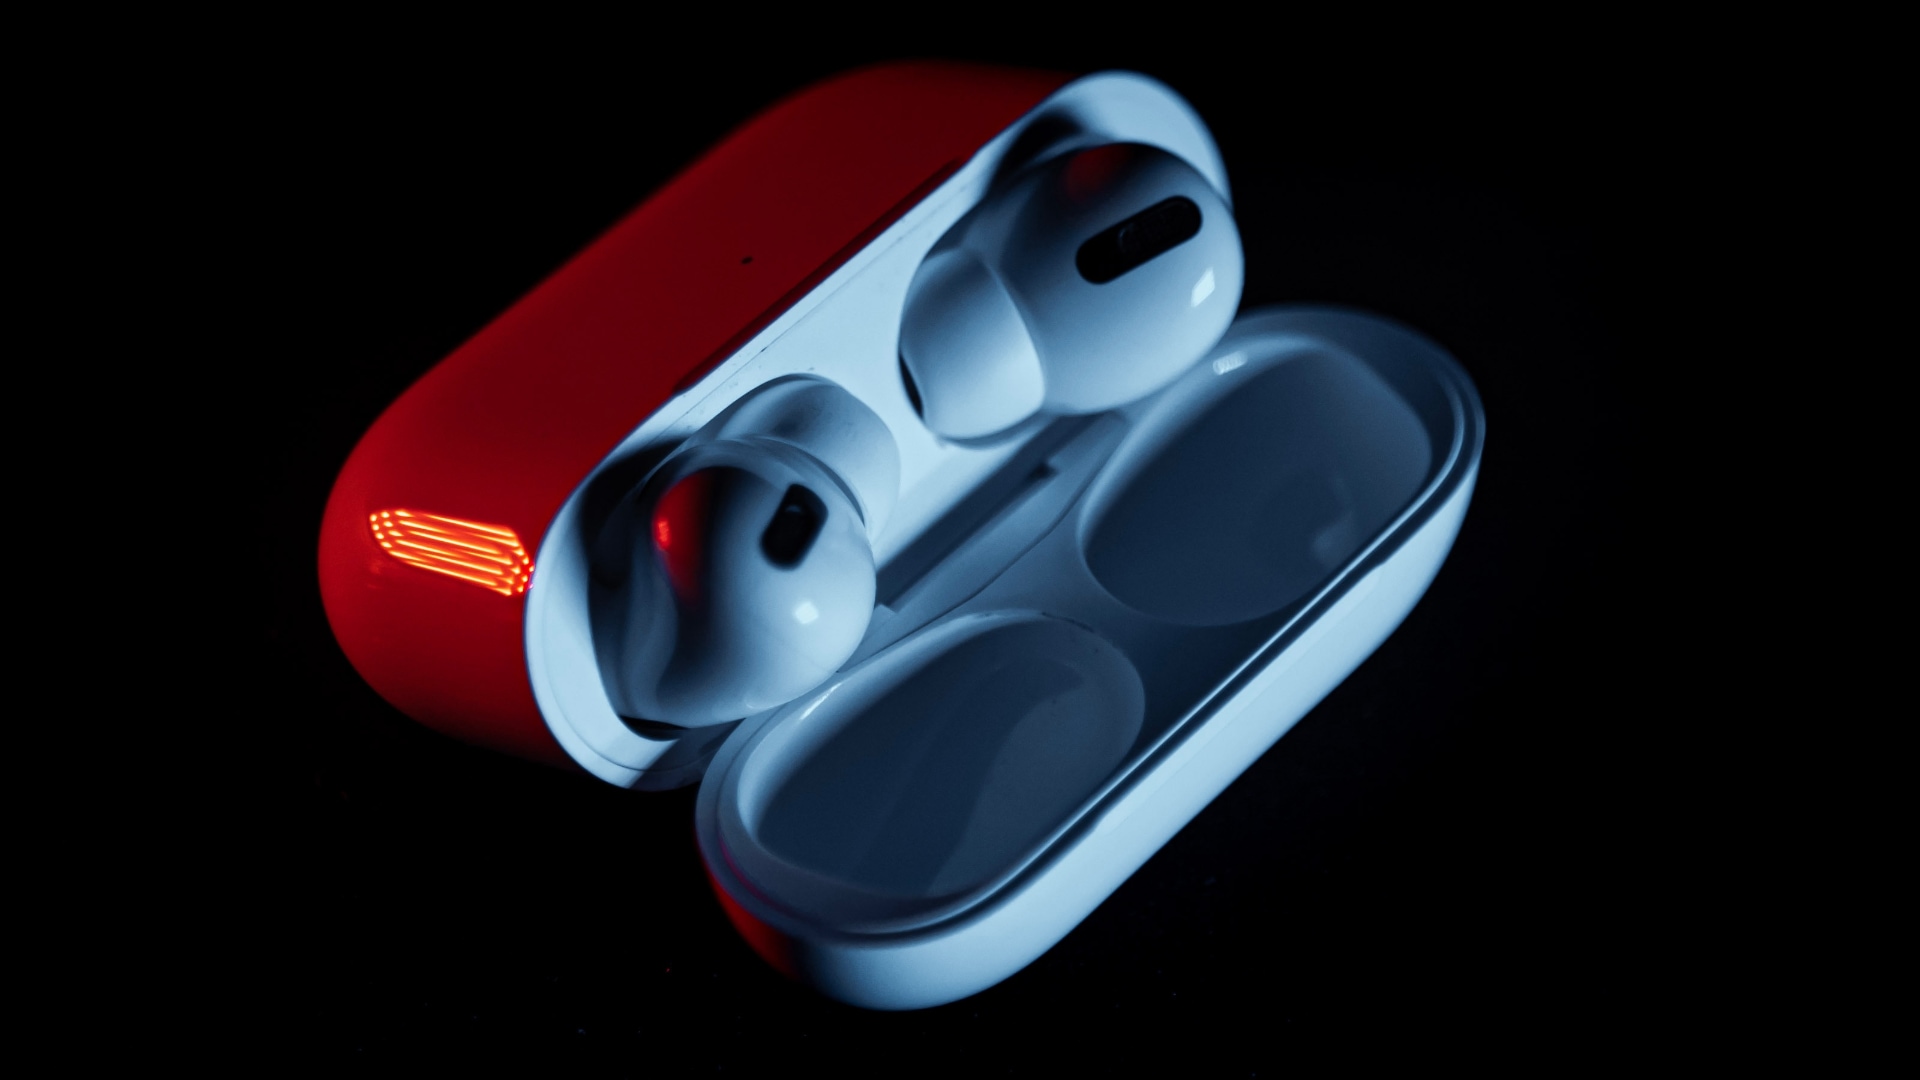 AirPods Pro in their charging case under red light, with the lid open , set against a black background